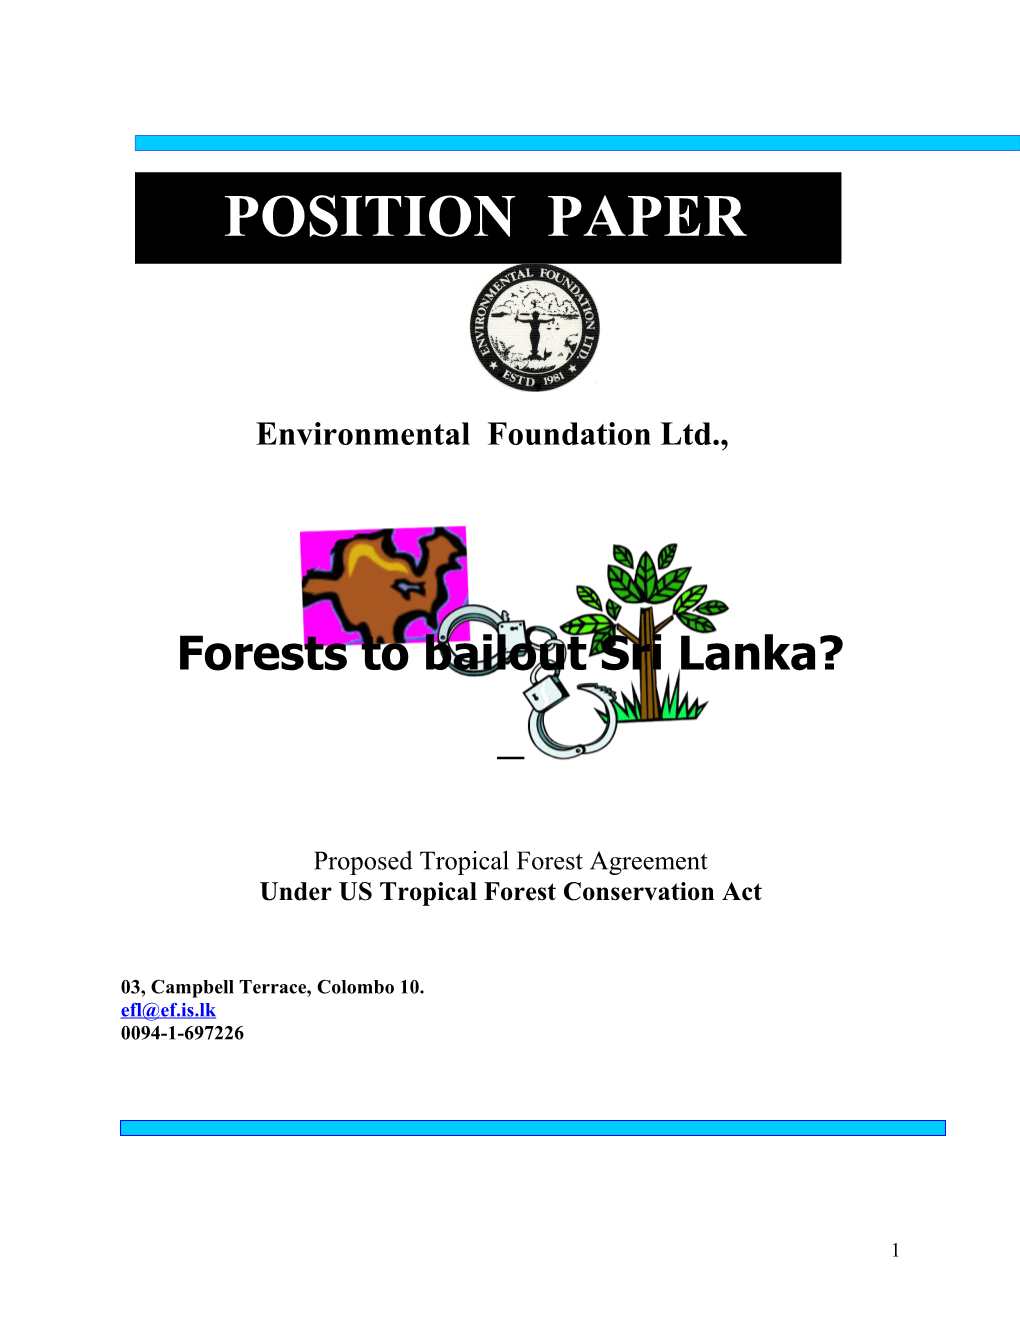 Ecological Debt and US Tropical Forest Conservation Act and Sri Lanka